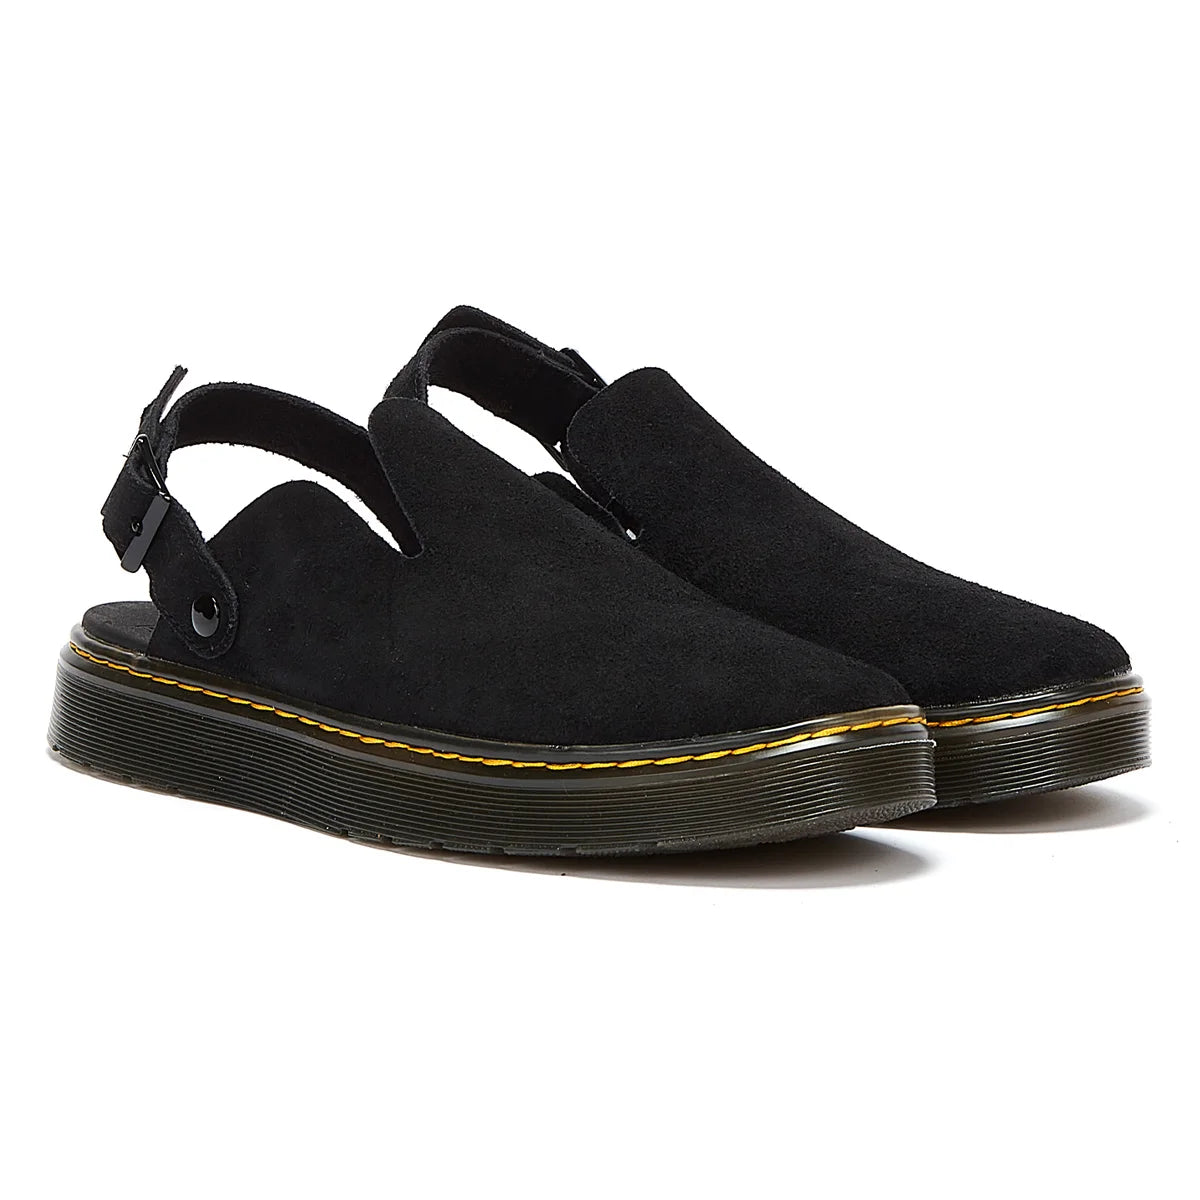 Dr. Martens Carlson Eh Suede Moss Back Womens Black Mule Sandals